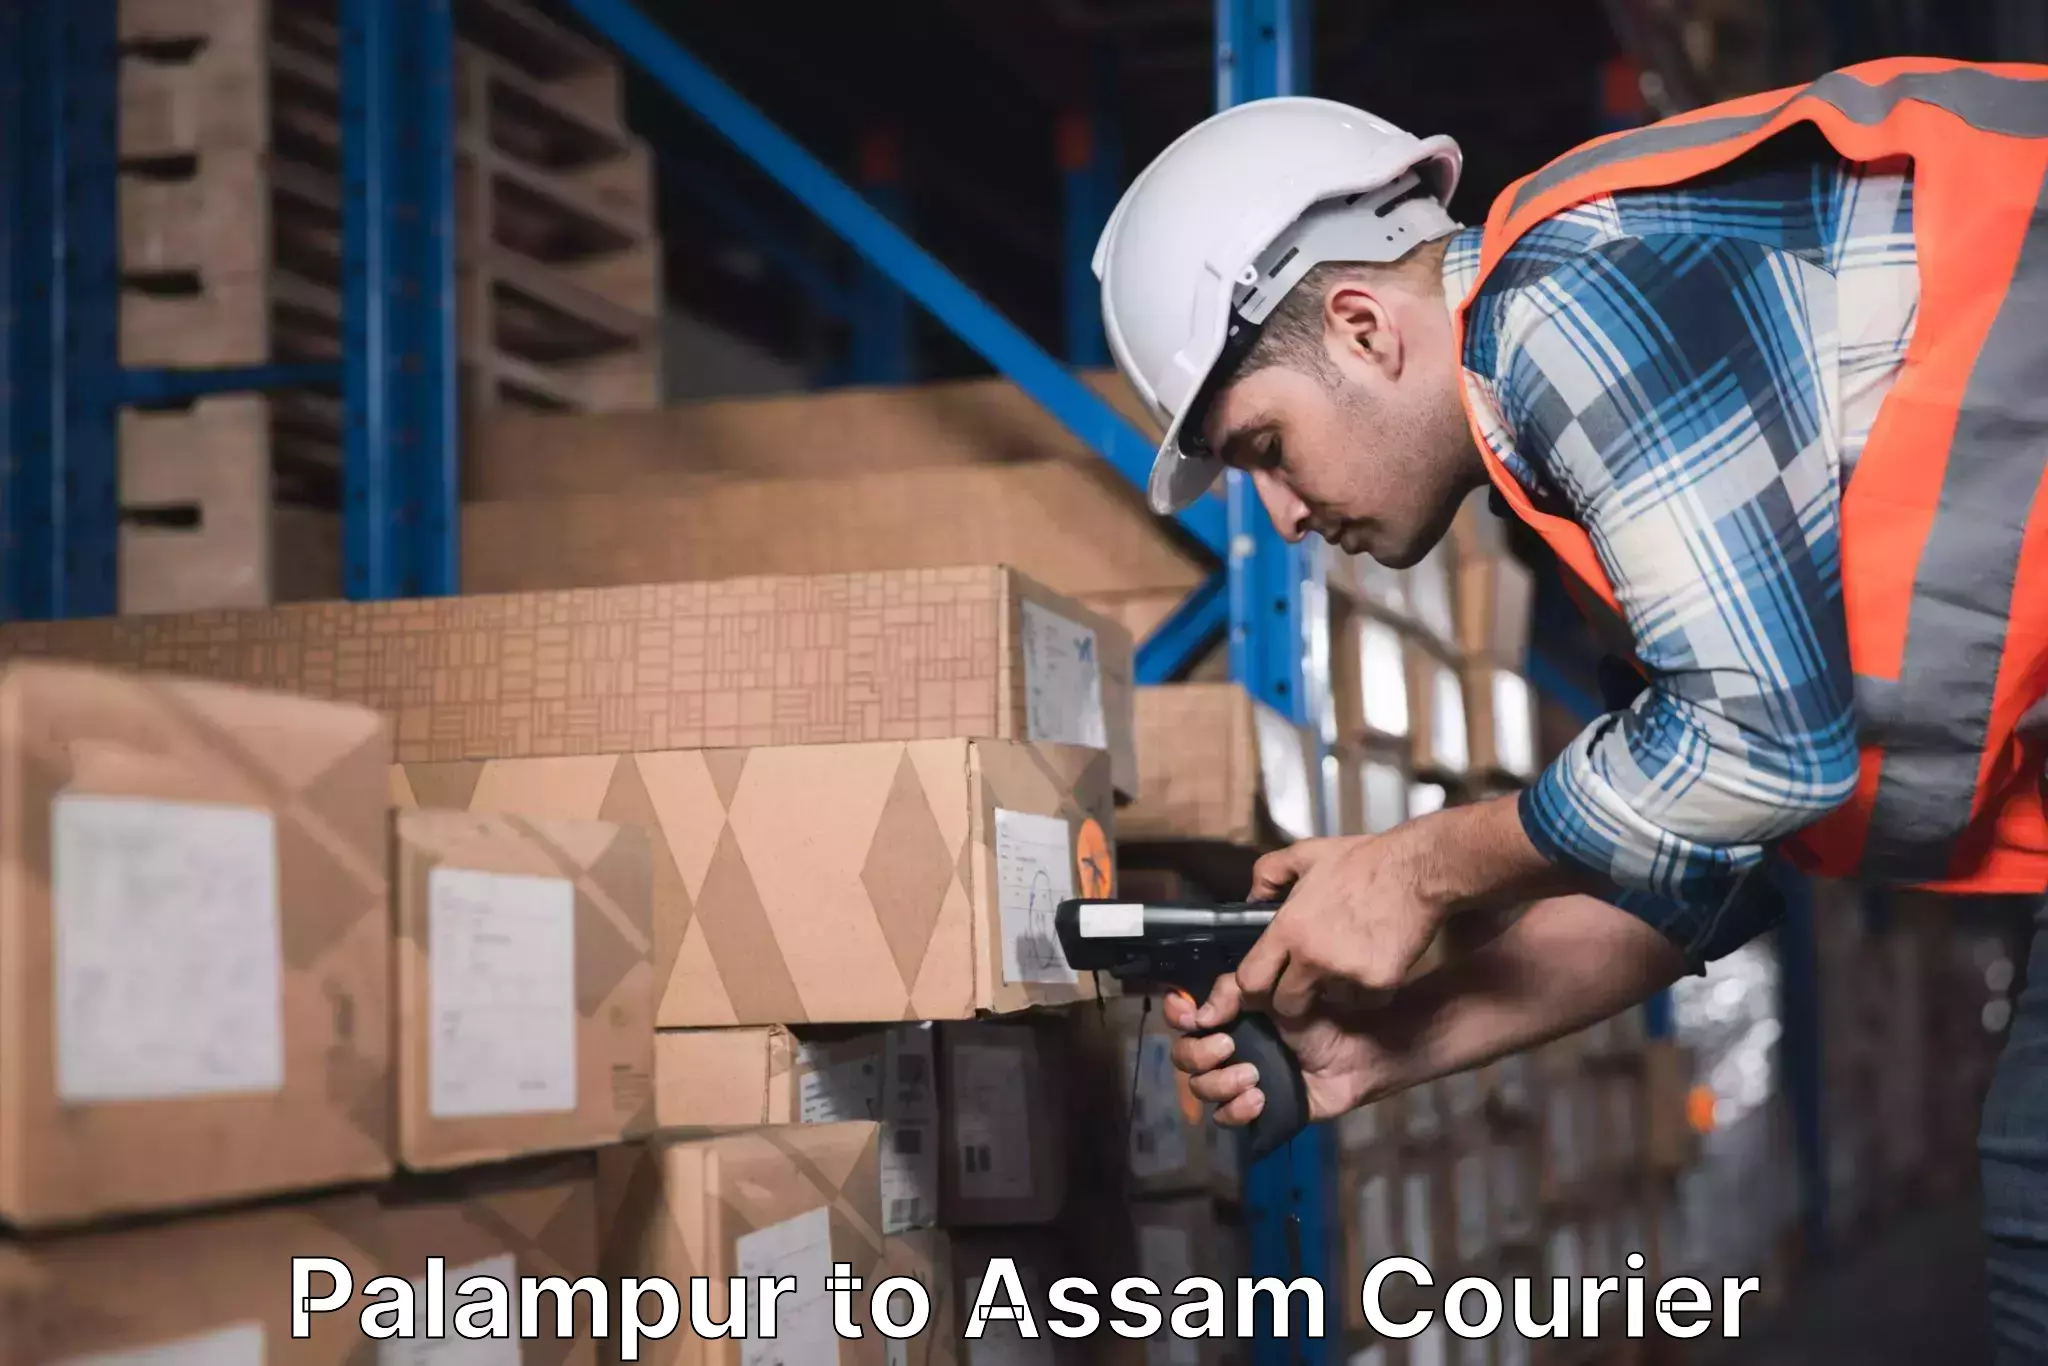 On-call courier service Palampur to Noonmati